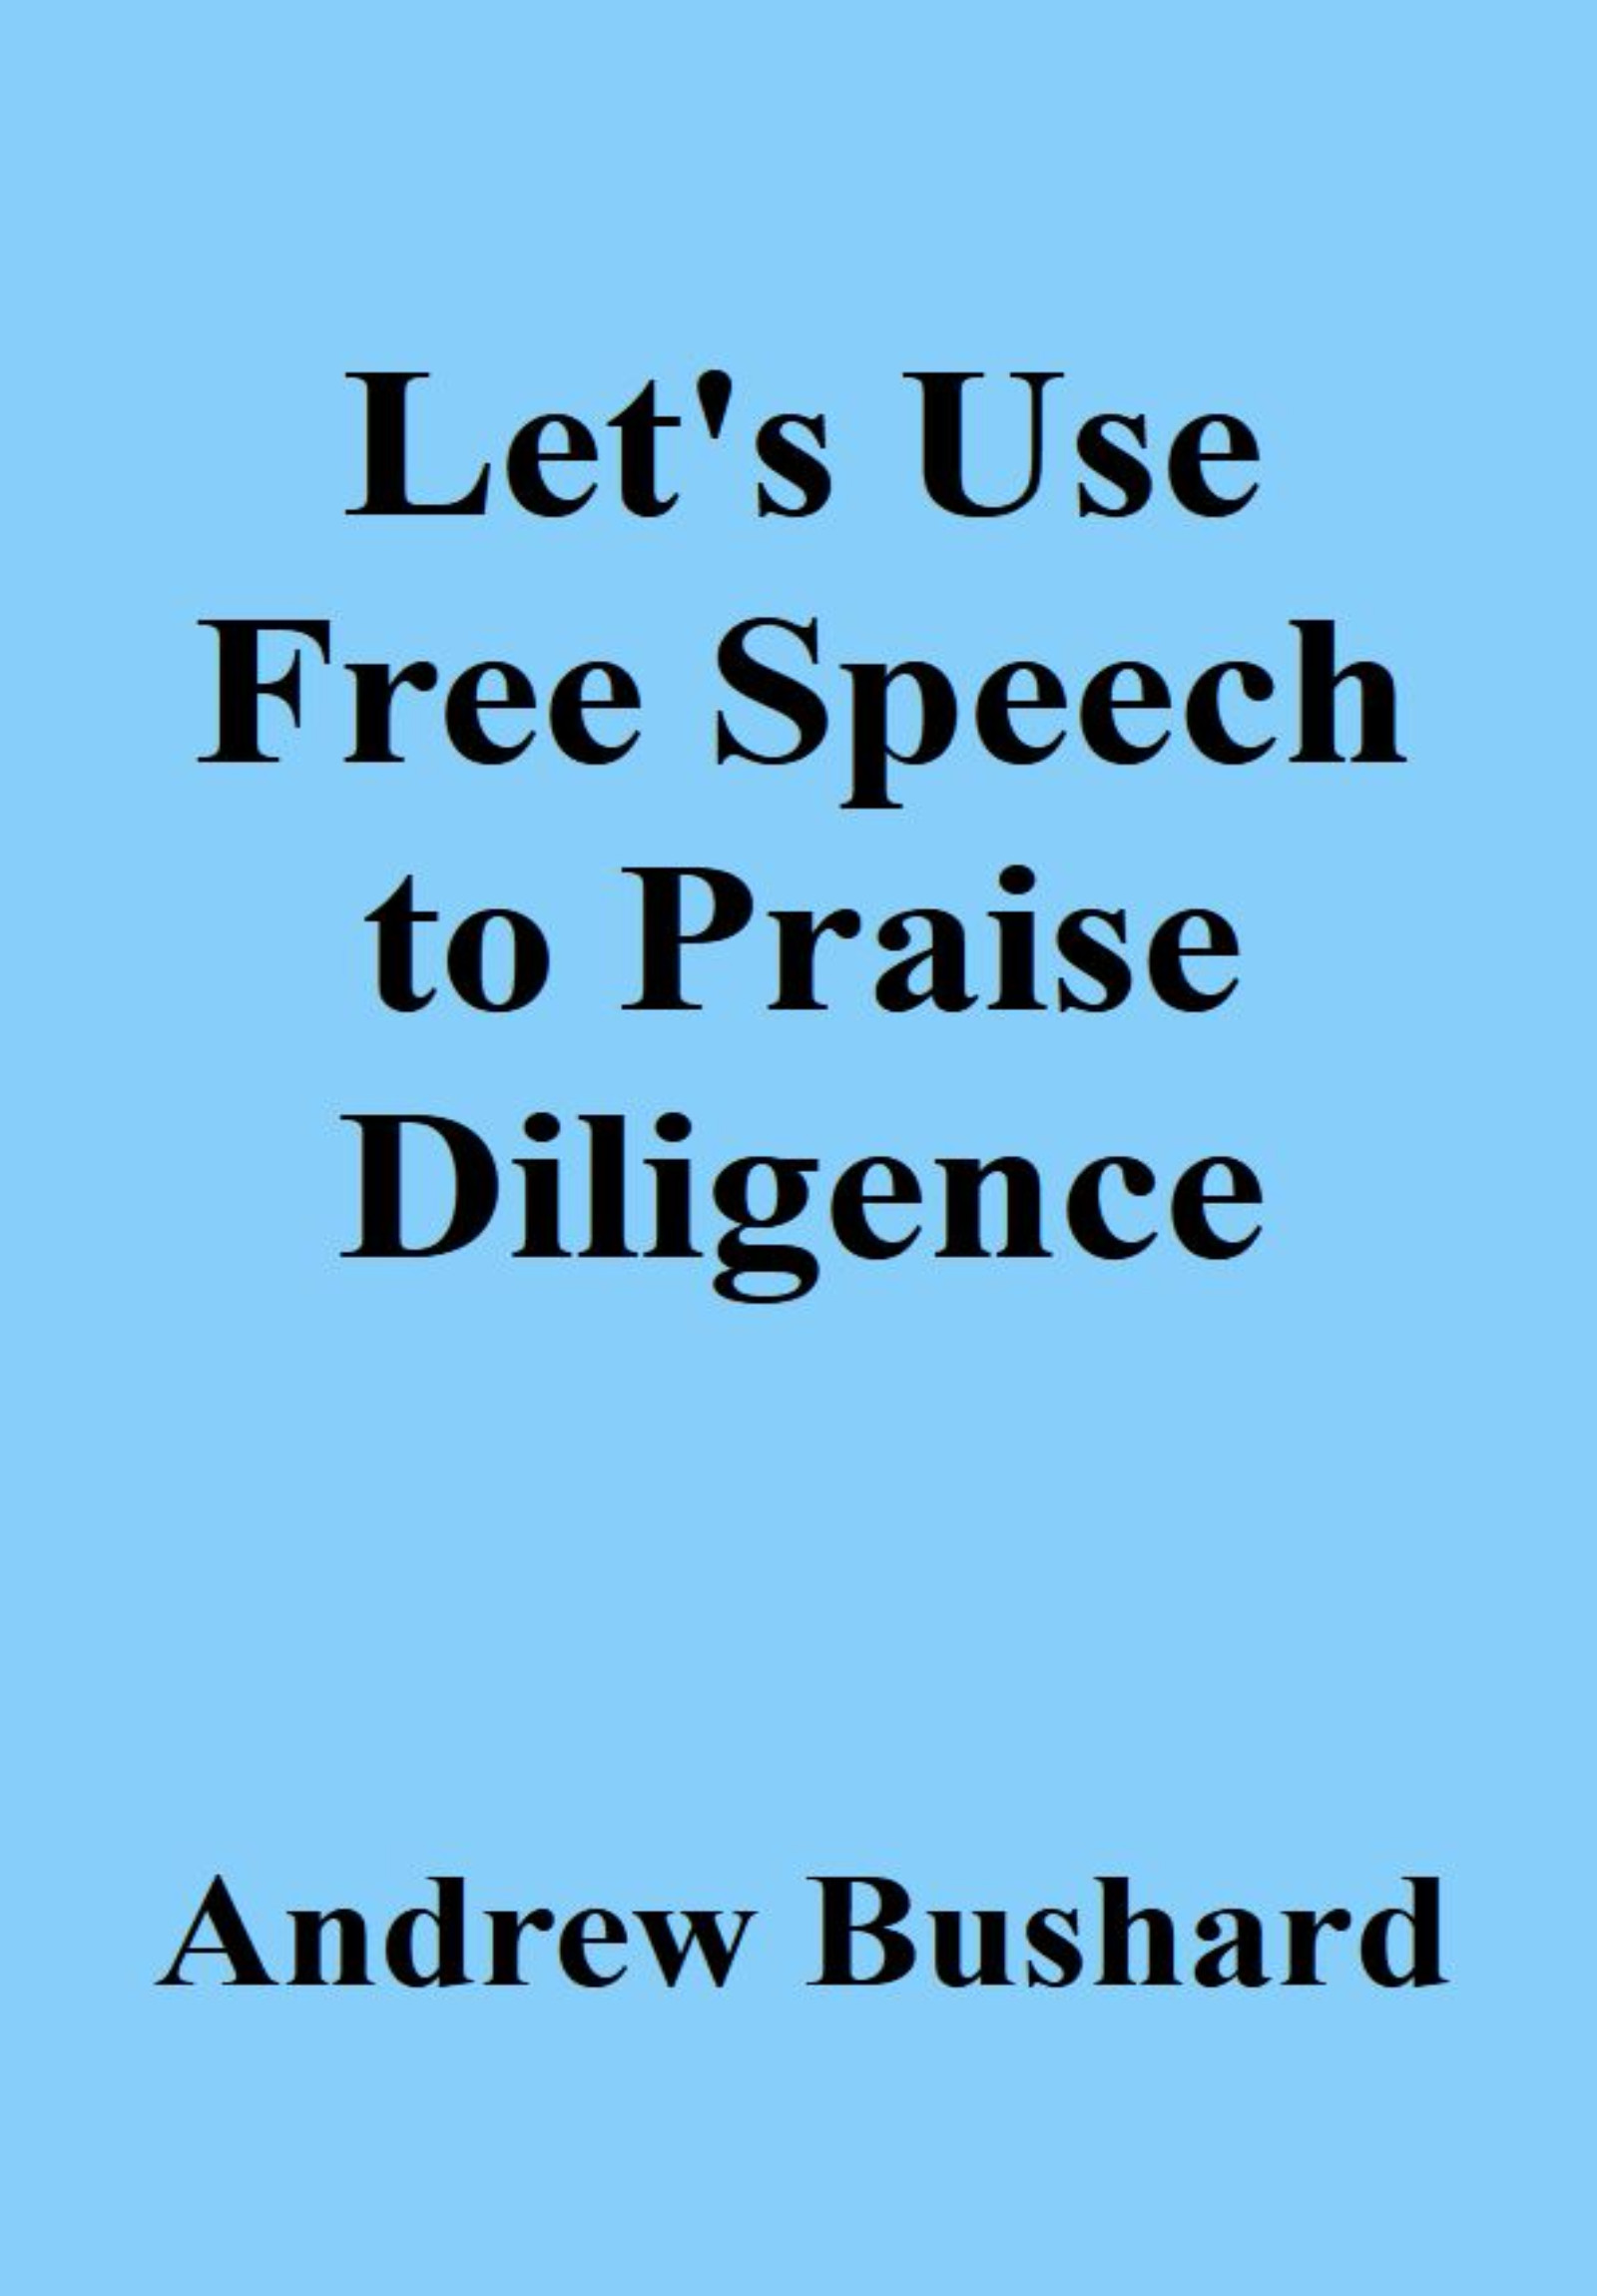 Let's Use Free Speech to Praise Diligence's featured image